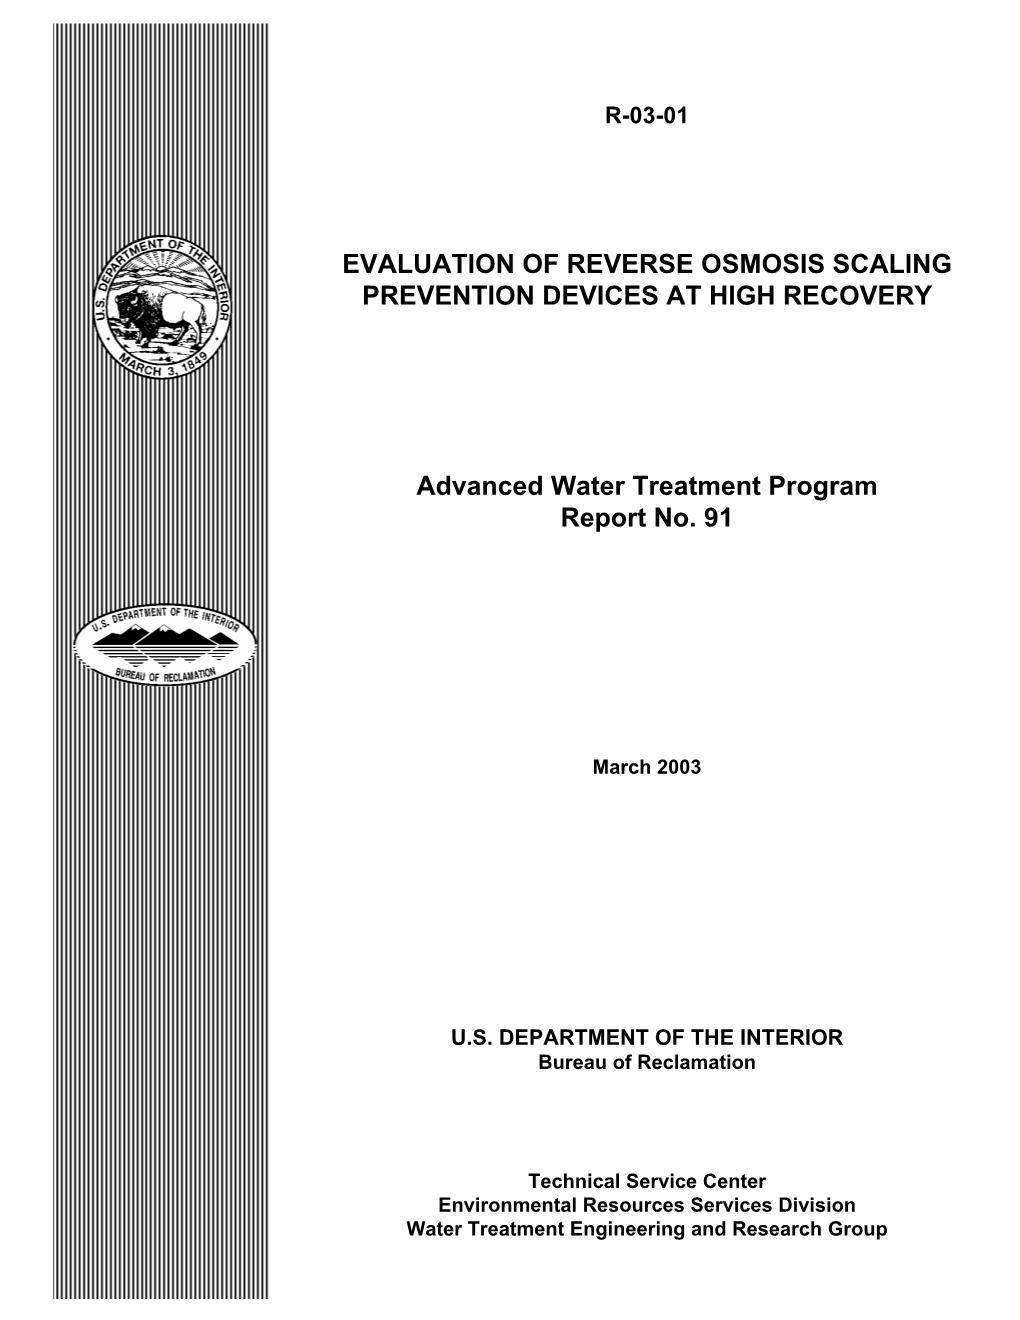 Evaluation of Reverse Osmosis Scaling Prevention Devices at High Recovery